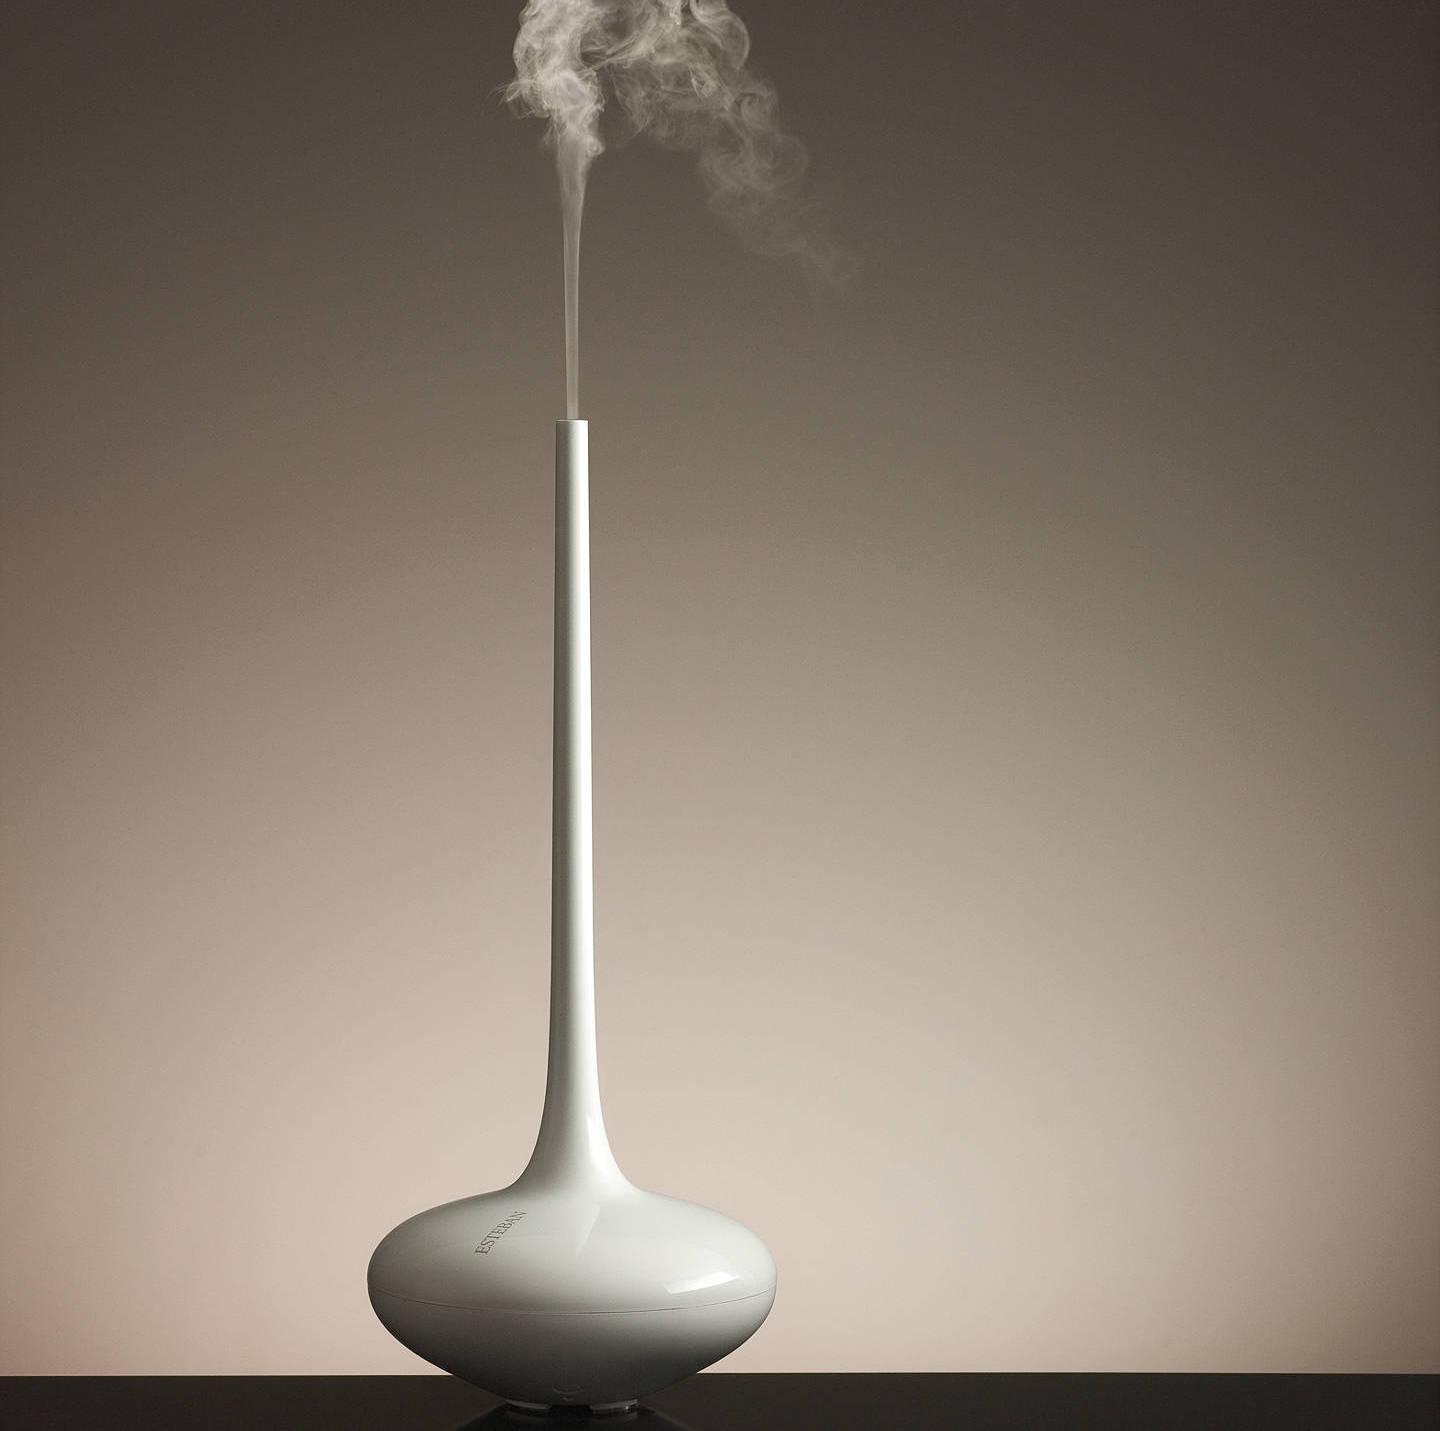 Clean Air in Minutes: 5 Stylish Gadgets To Instantly Purify Your Home